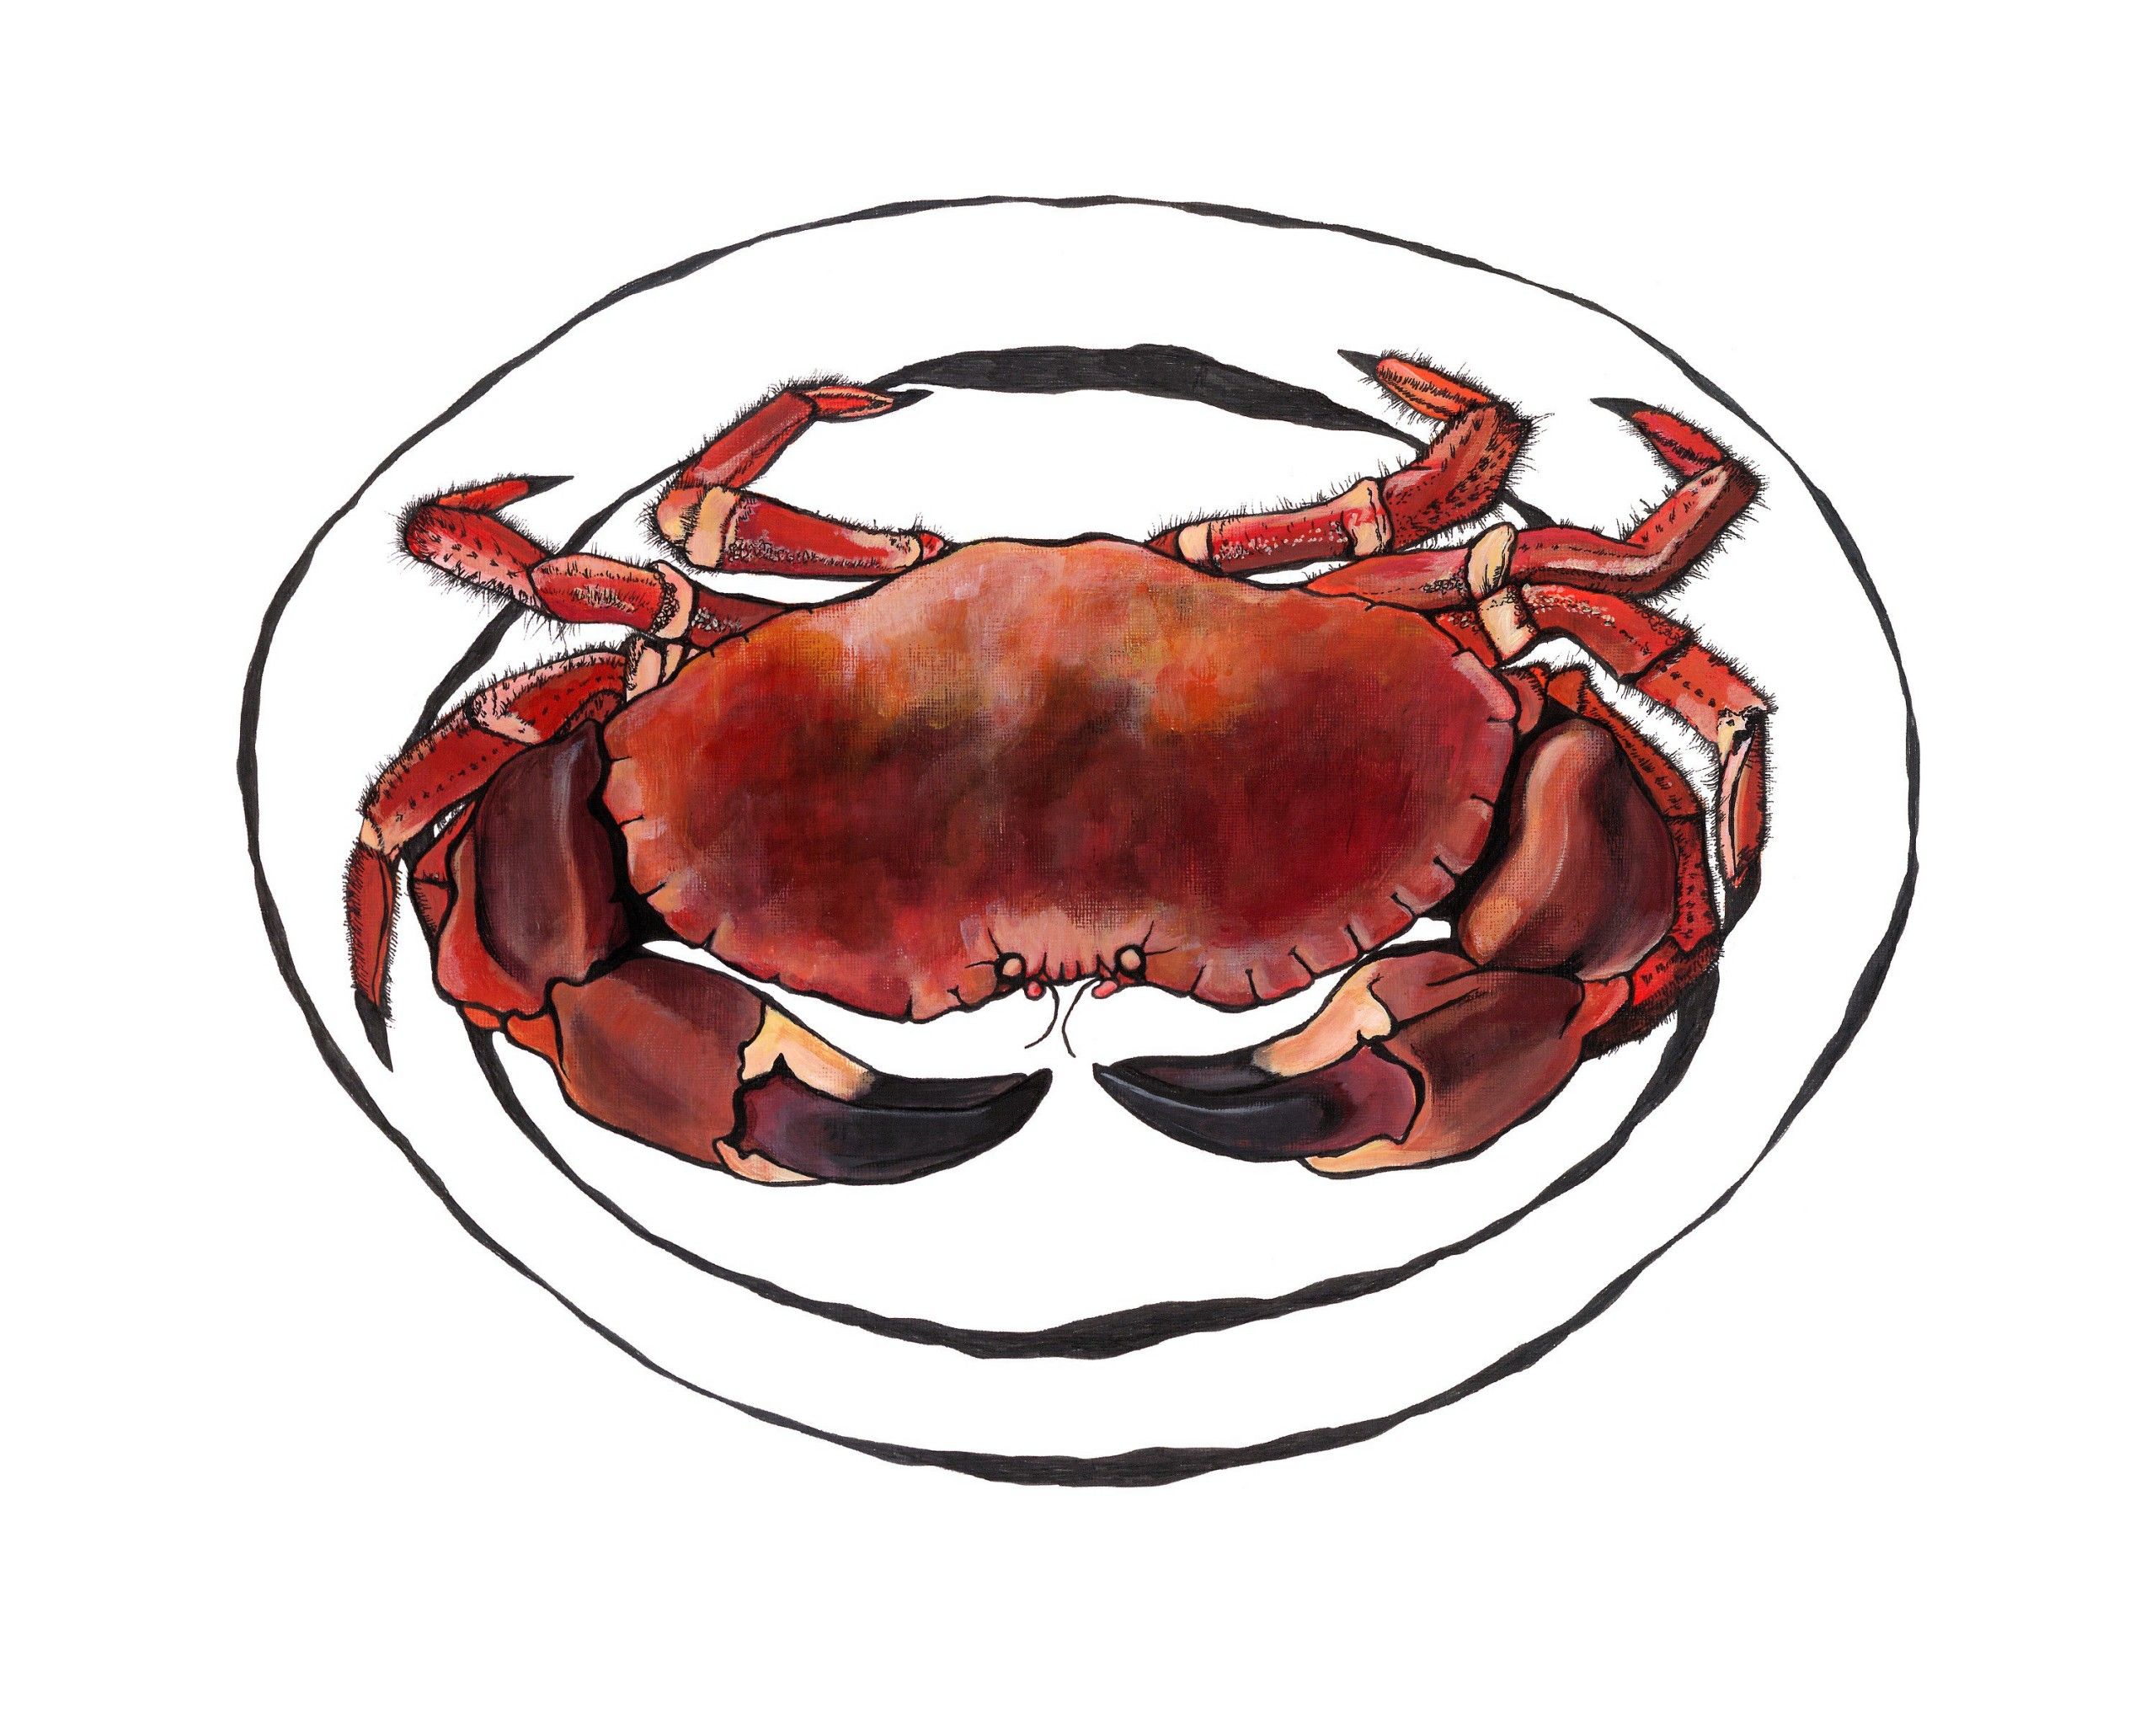 Crab by Lucy Routh